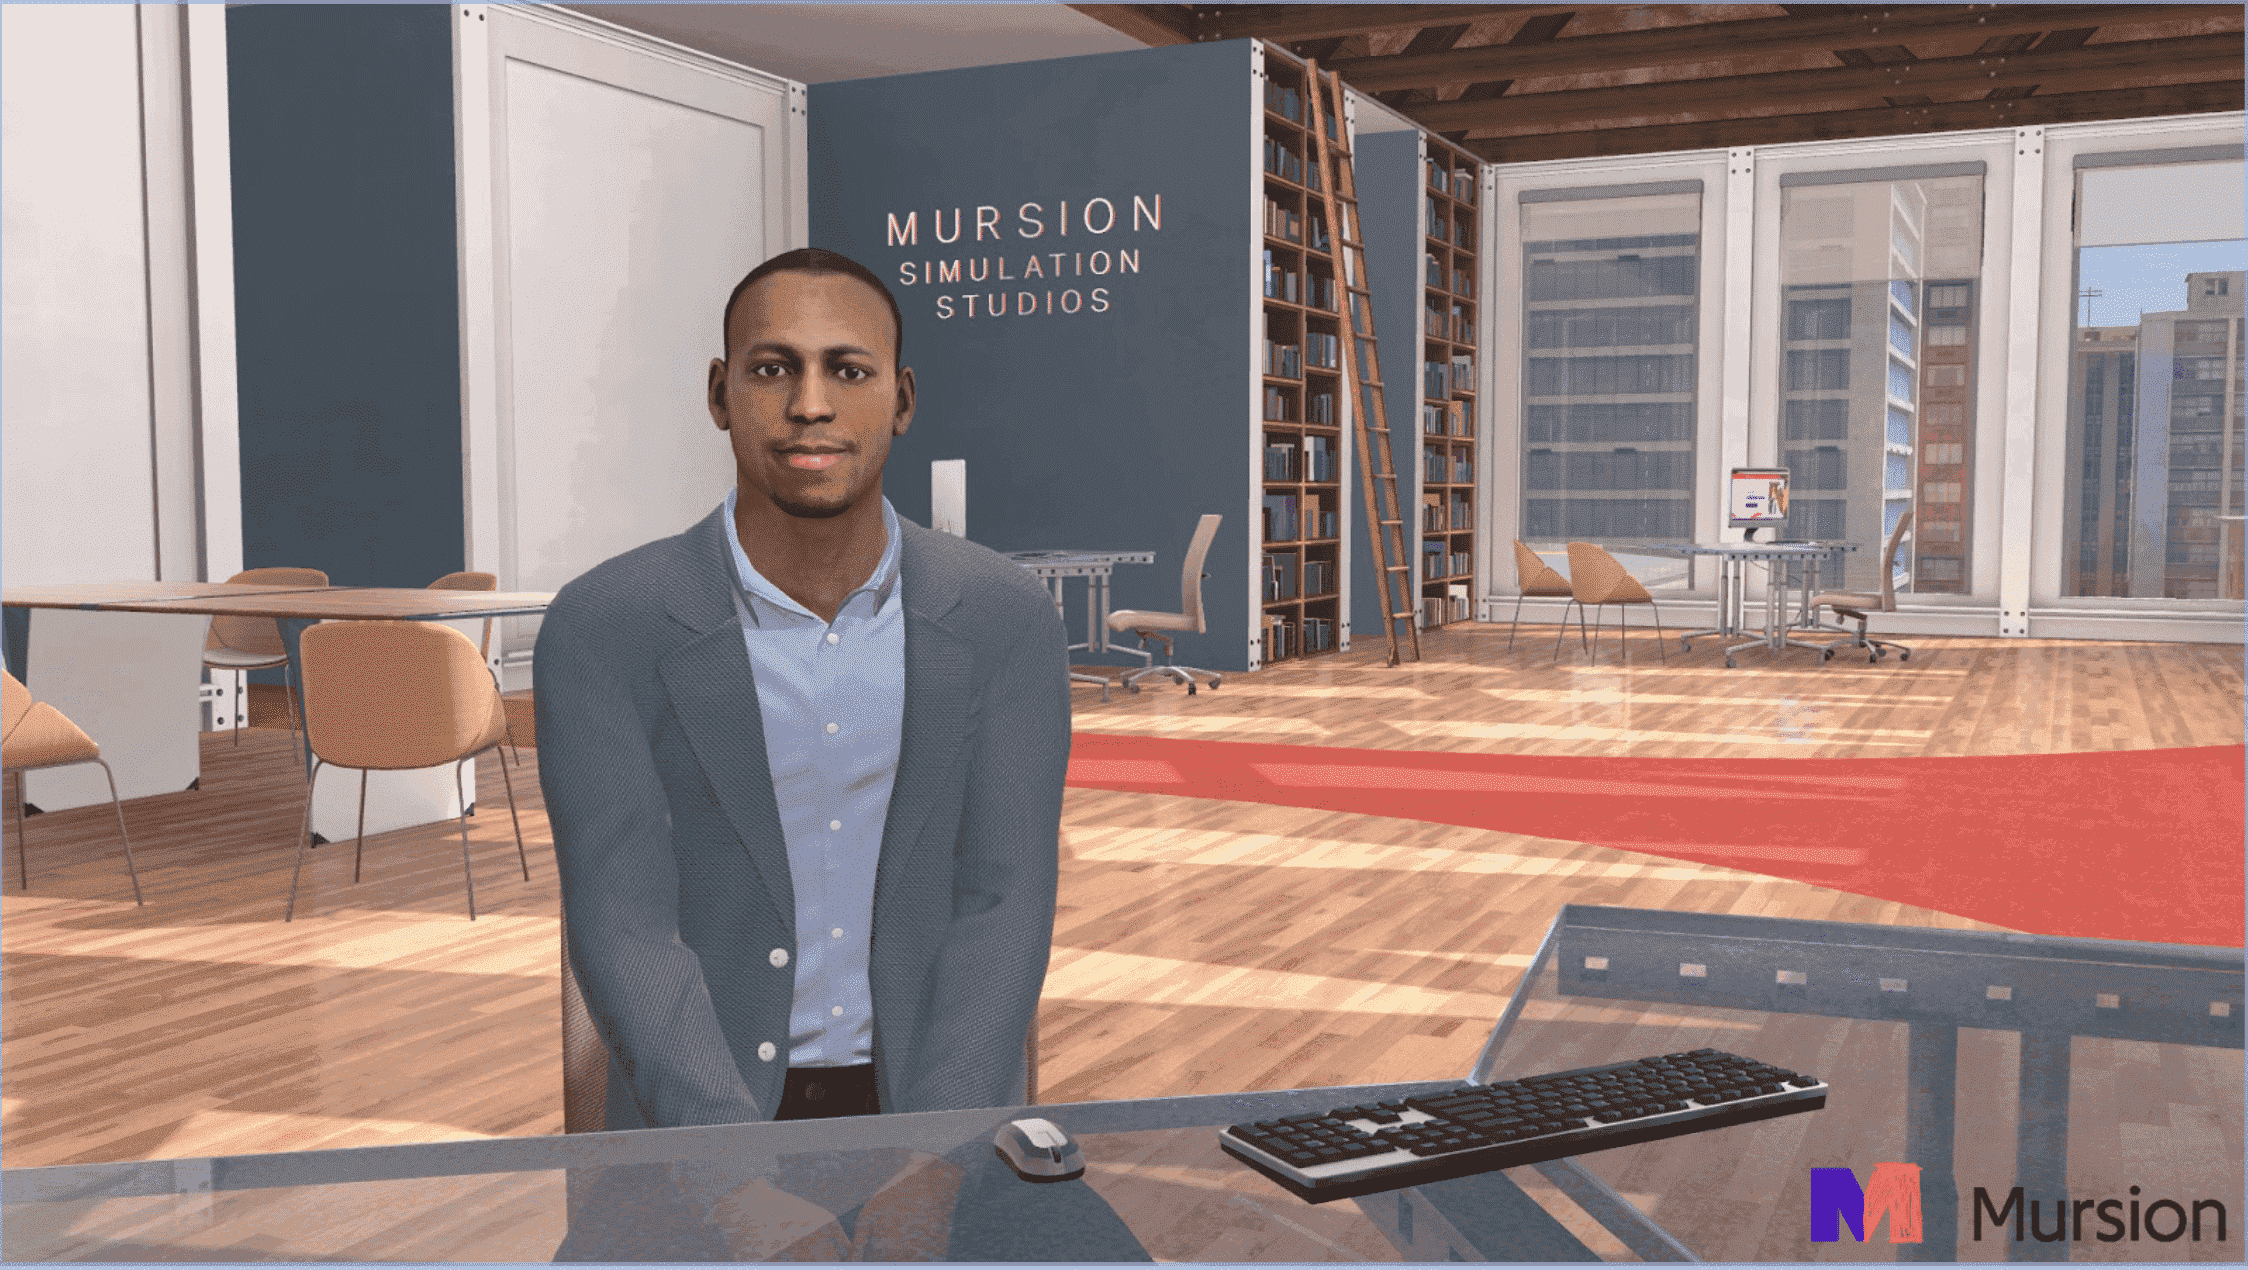 VR simulations for essential workplace skills and emotional intelligence